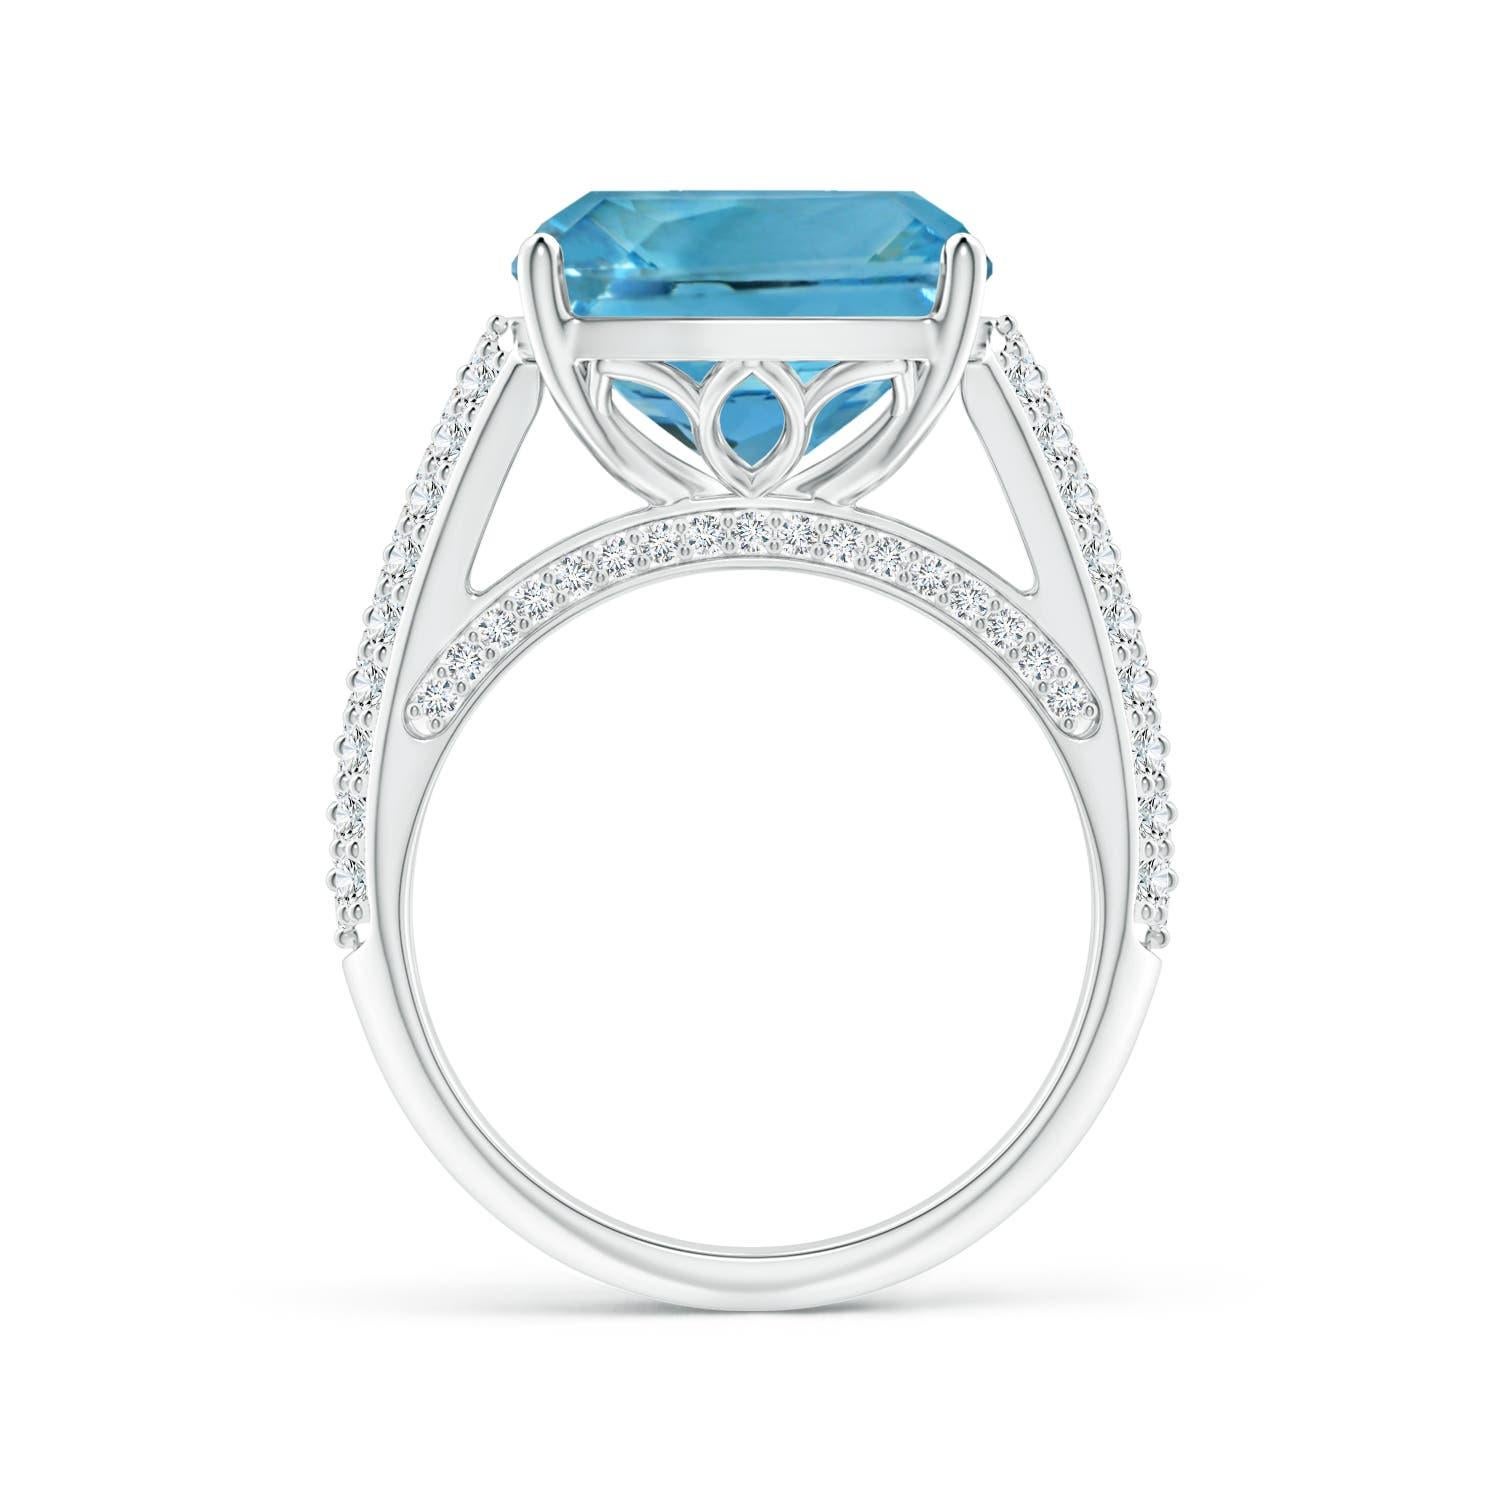 For Sale:  Angara Gia Certified Natural Aquamarine White Gold Ring with Pave-Set Diamonds 2